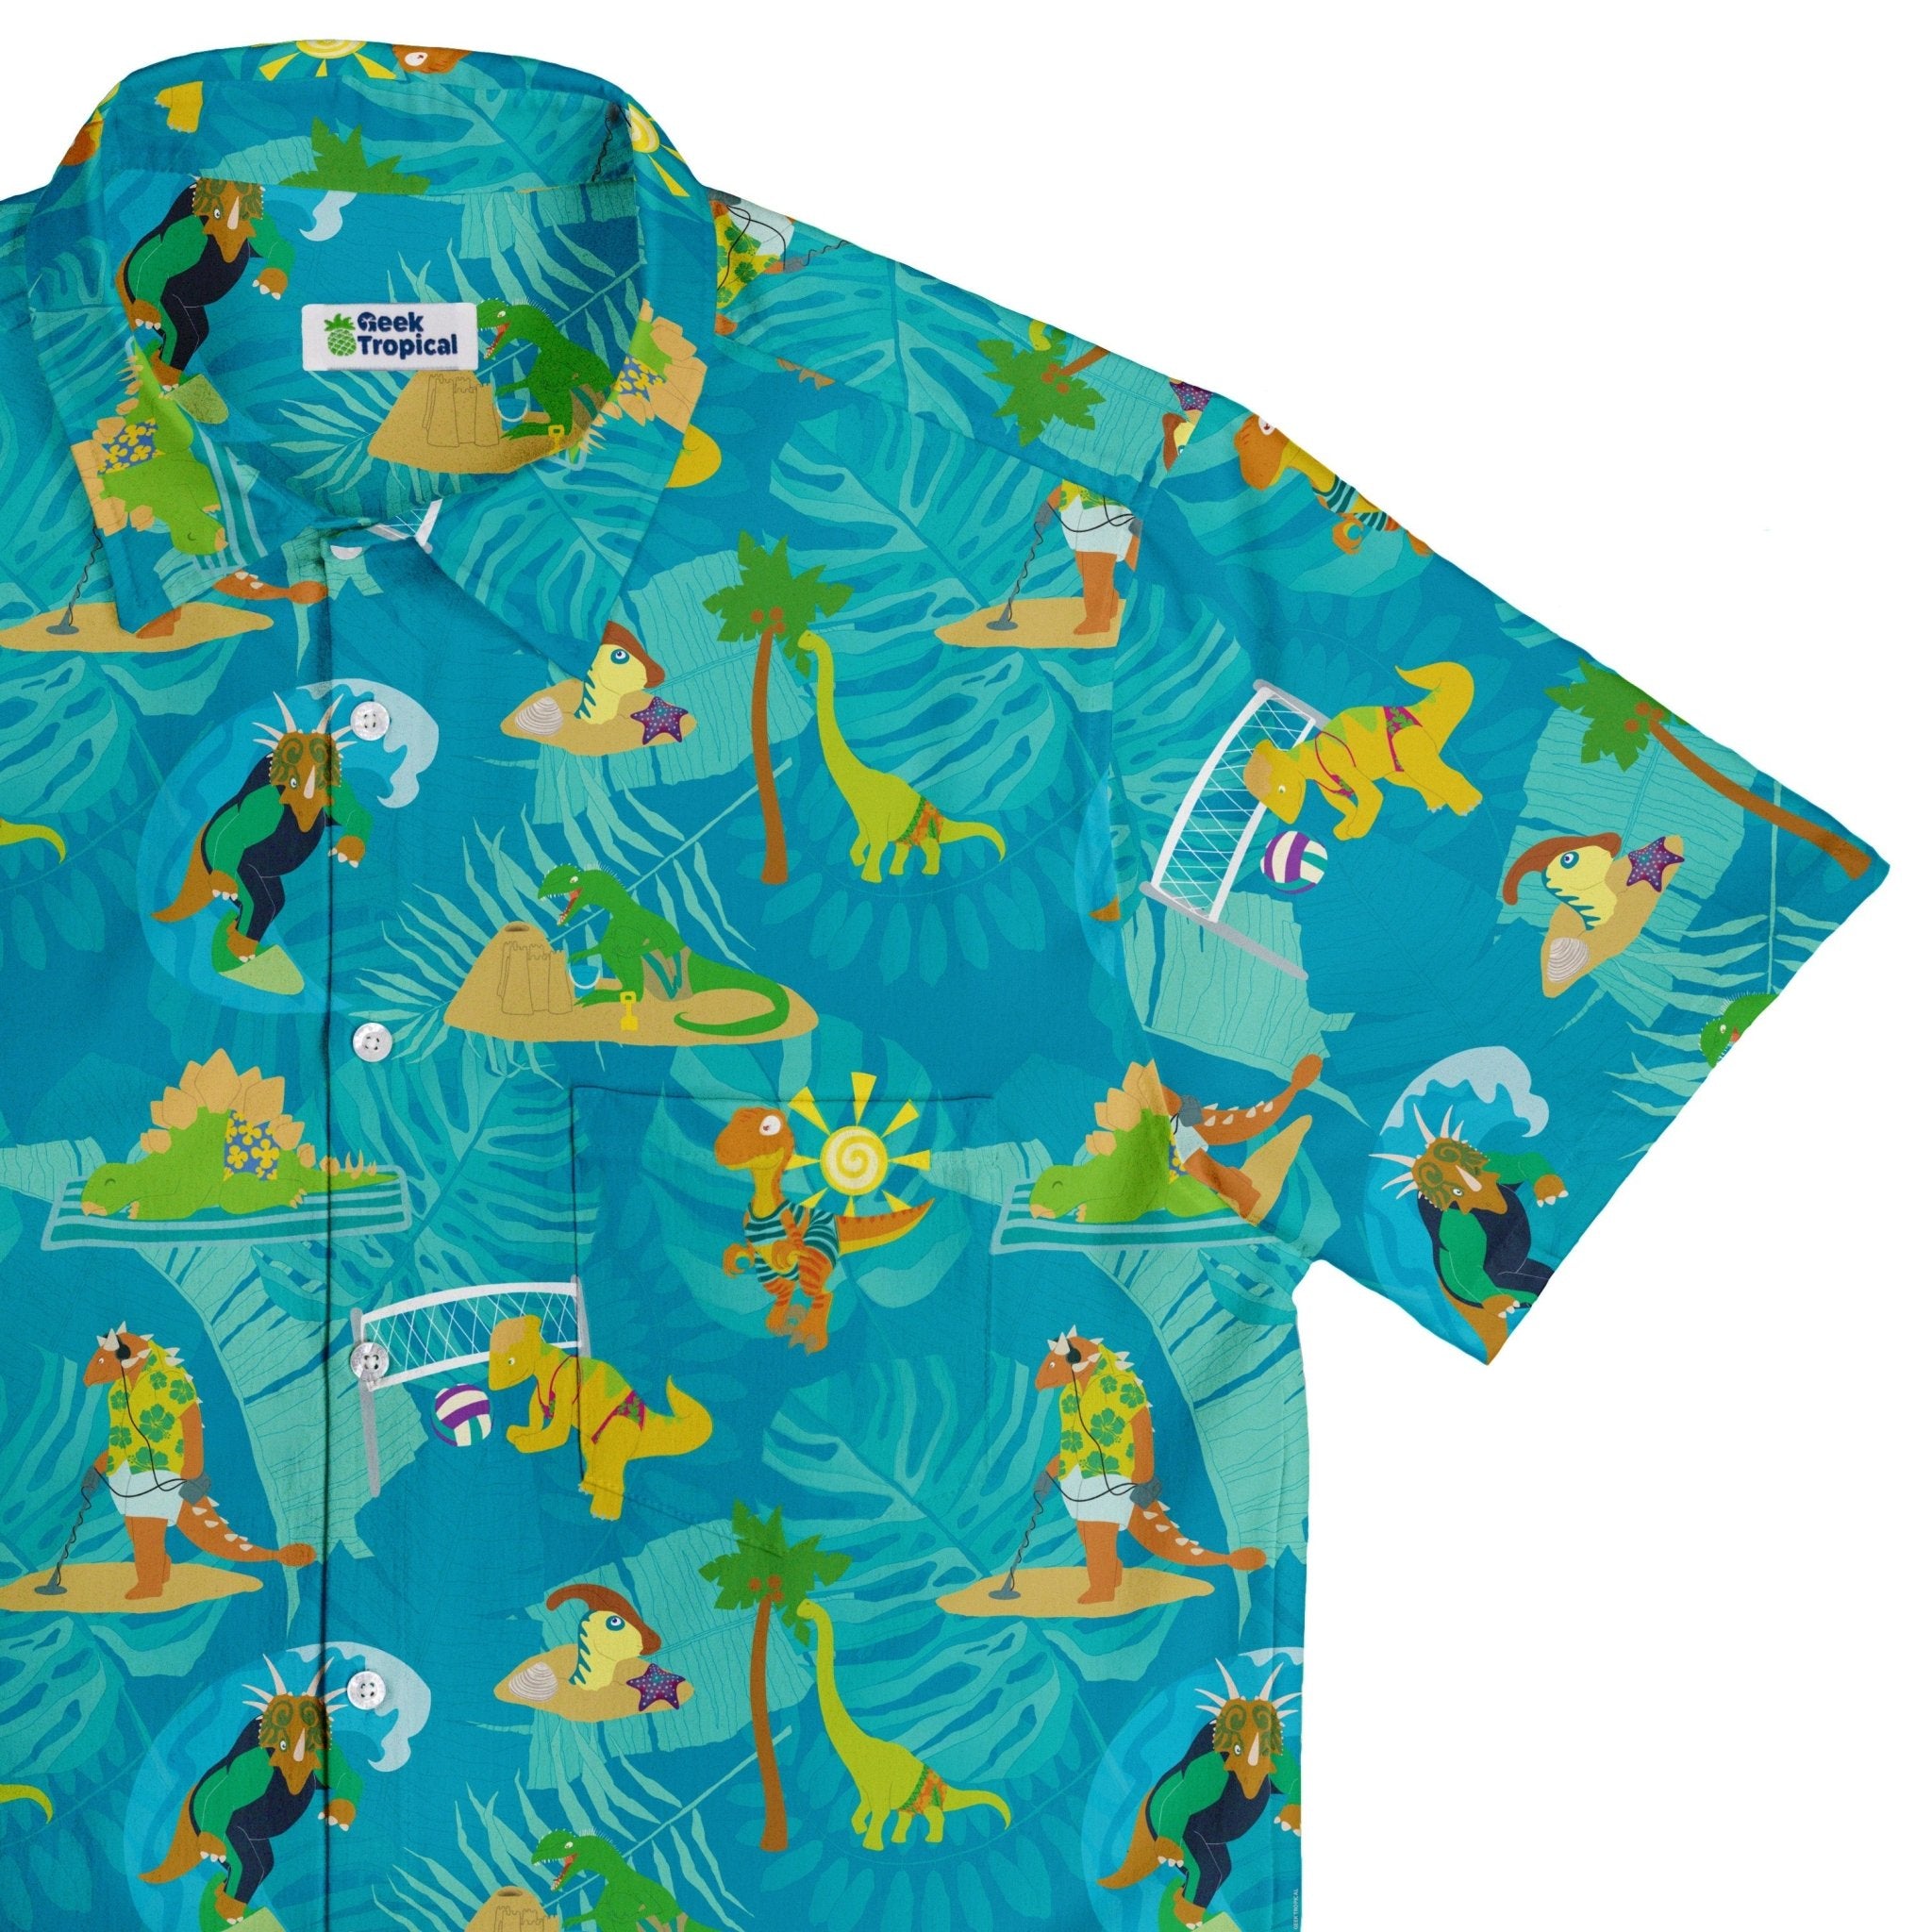 Dino Beach Party Button Up Shirt - adult sizing - Designs by Nathan - dinosaur print